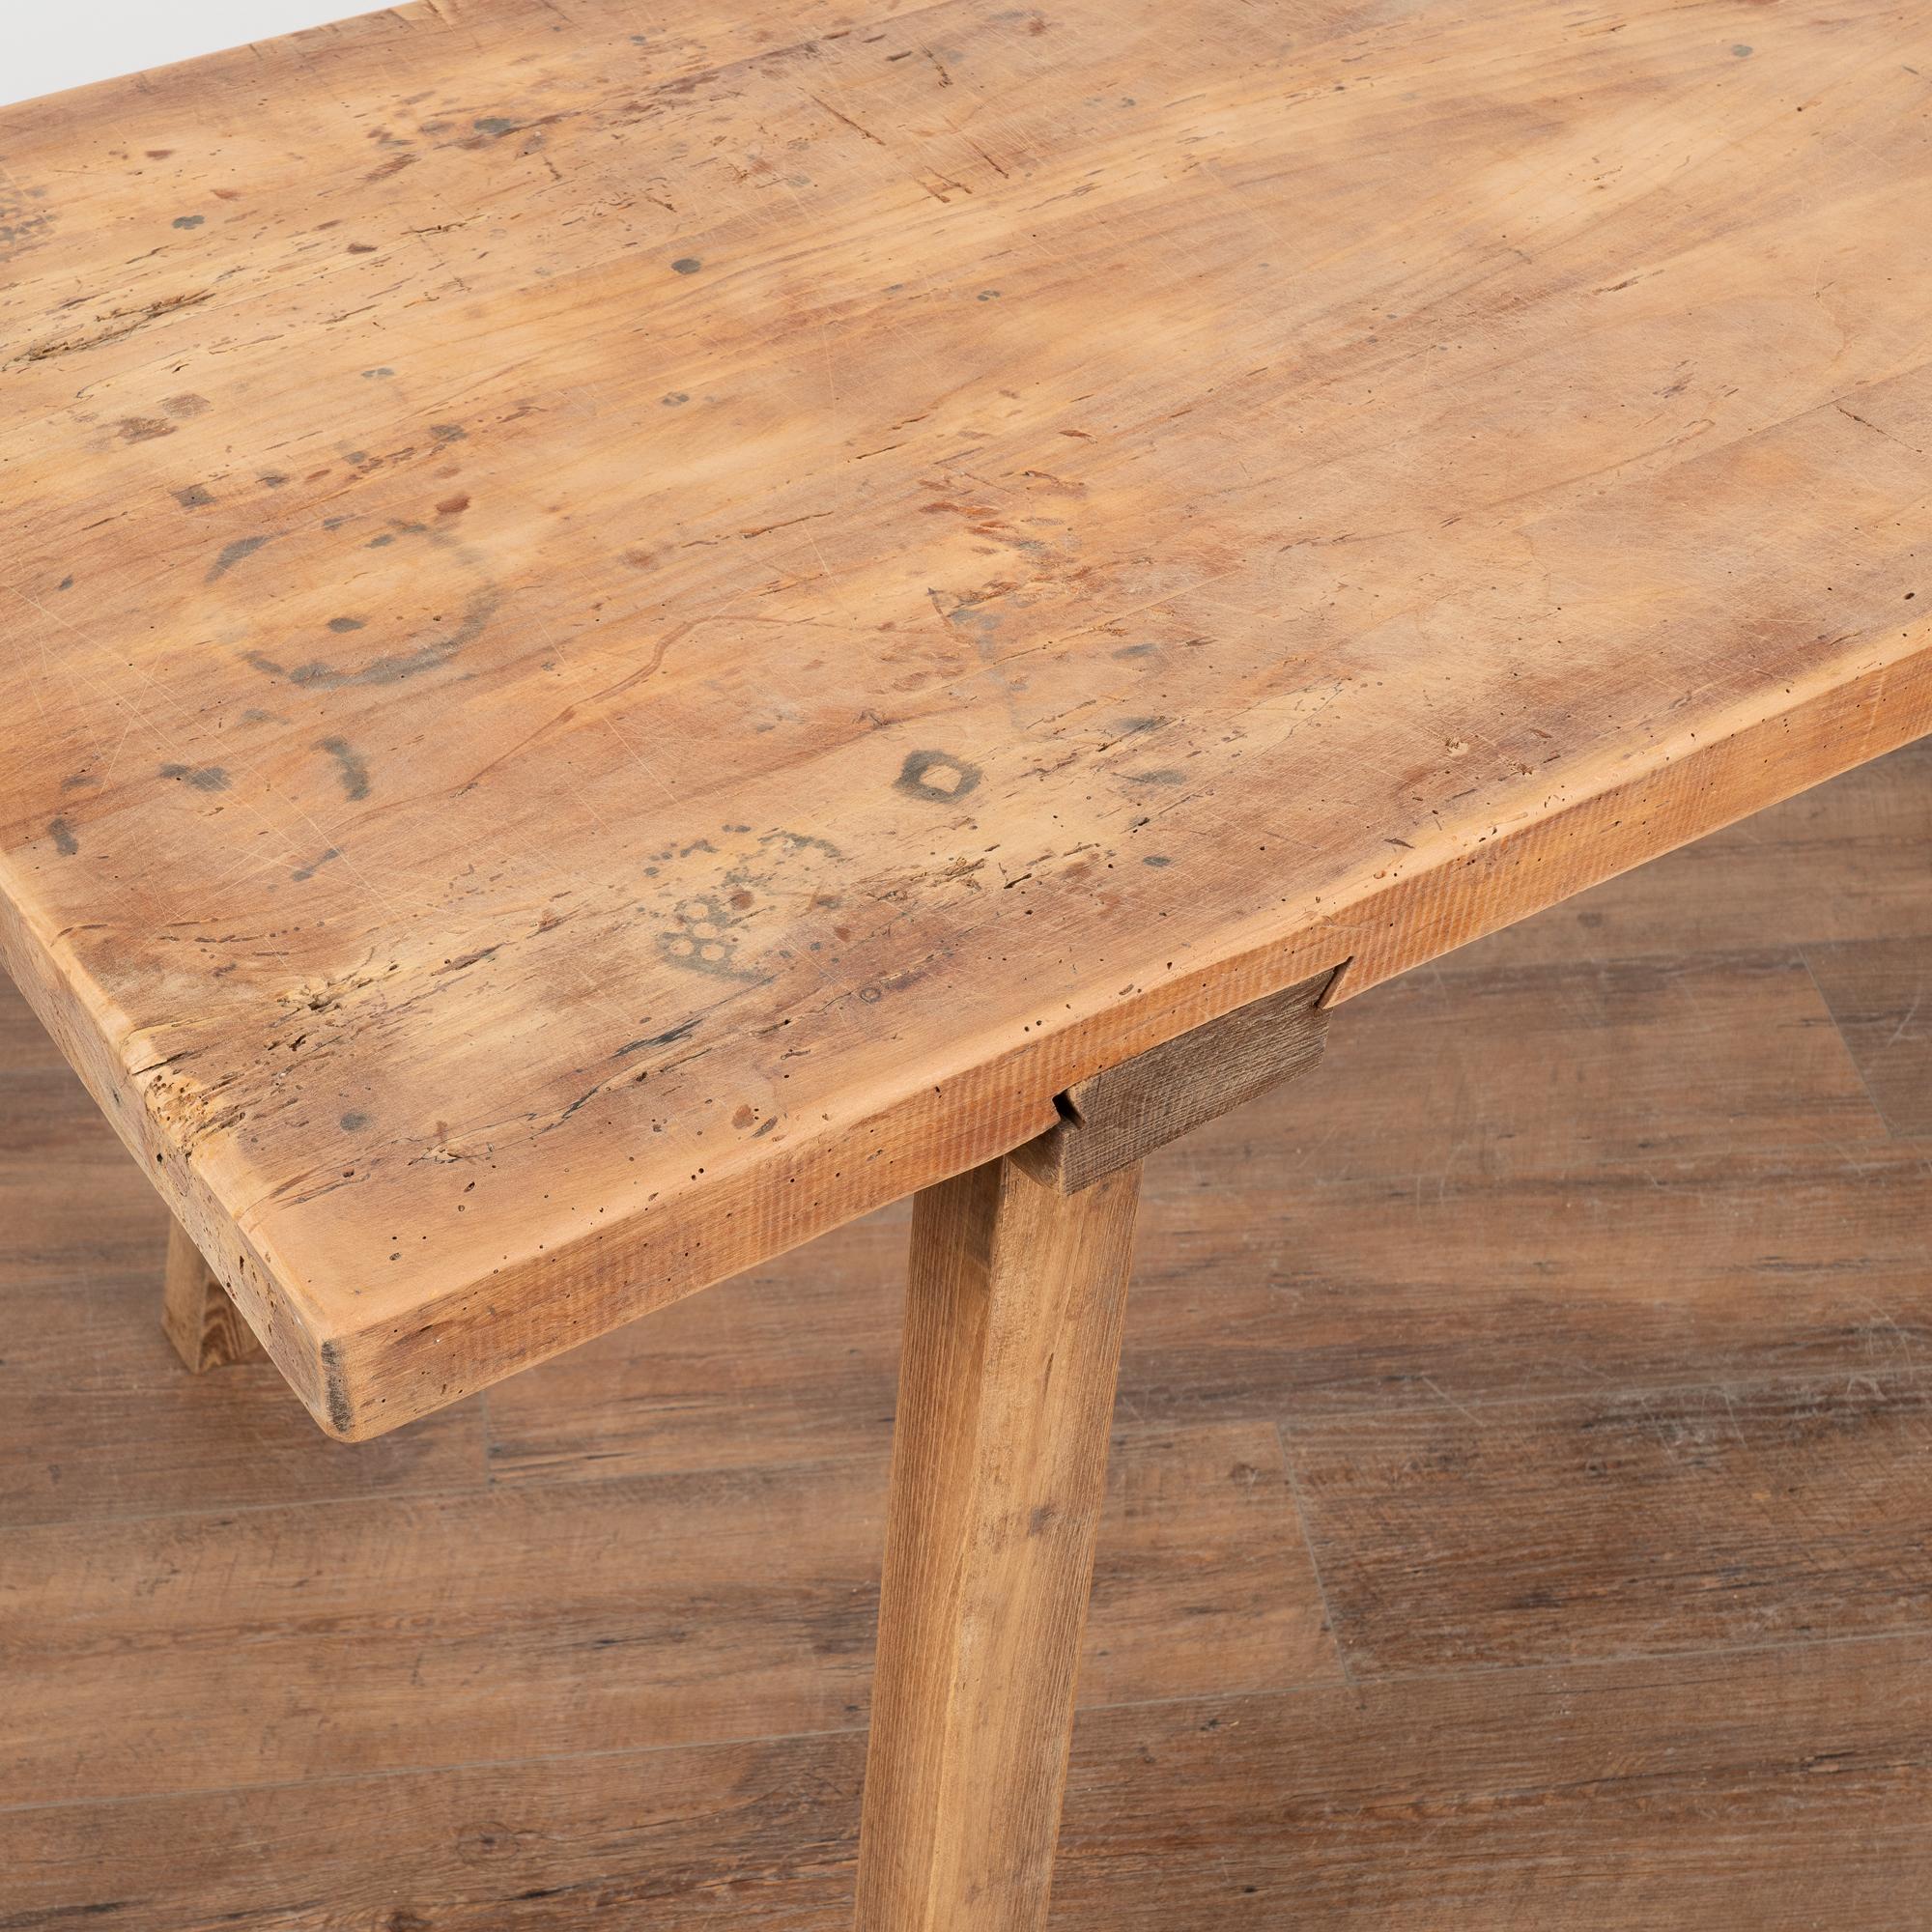 20th Century Rustic Plank Top Console Table With Peg Legs, Hungary circa 1900 For Sale